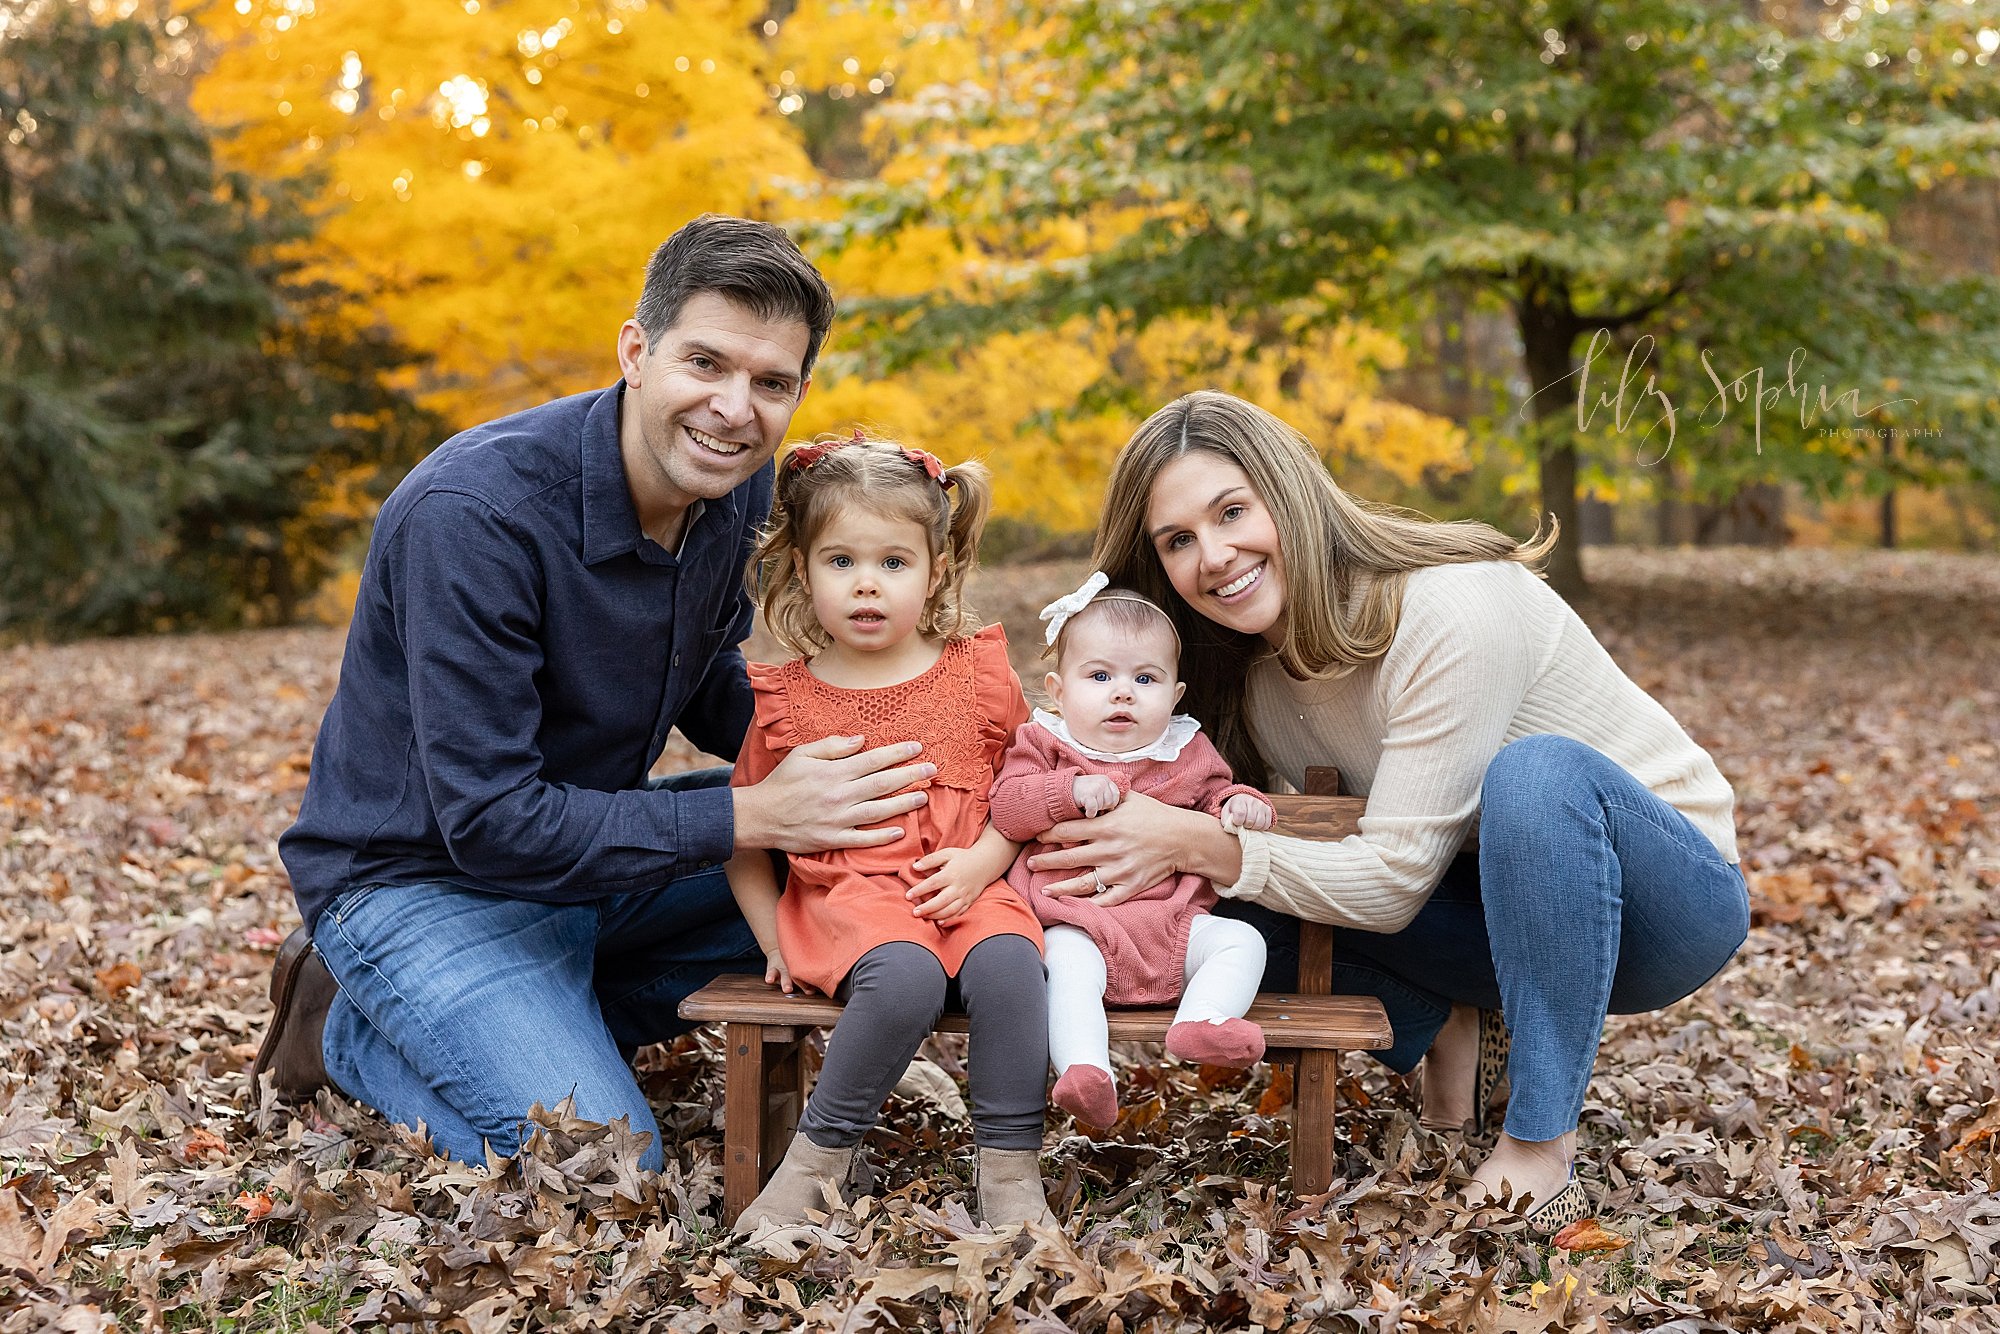 intown-atlanta-decatur-buckhead-brookhaven-fall-family-park-leaves-outdoor-pictures_3949.jpg